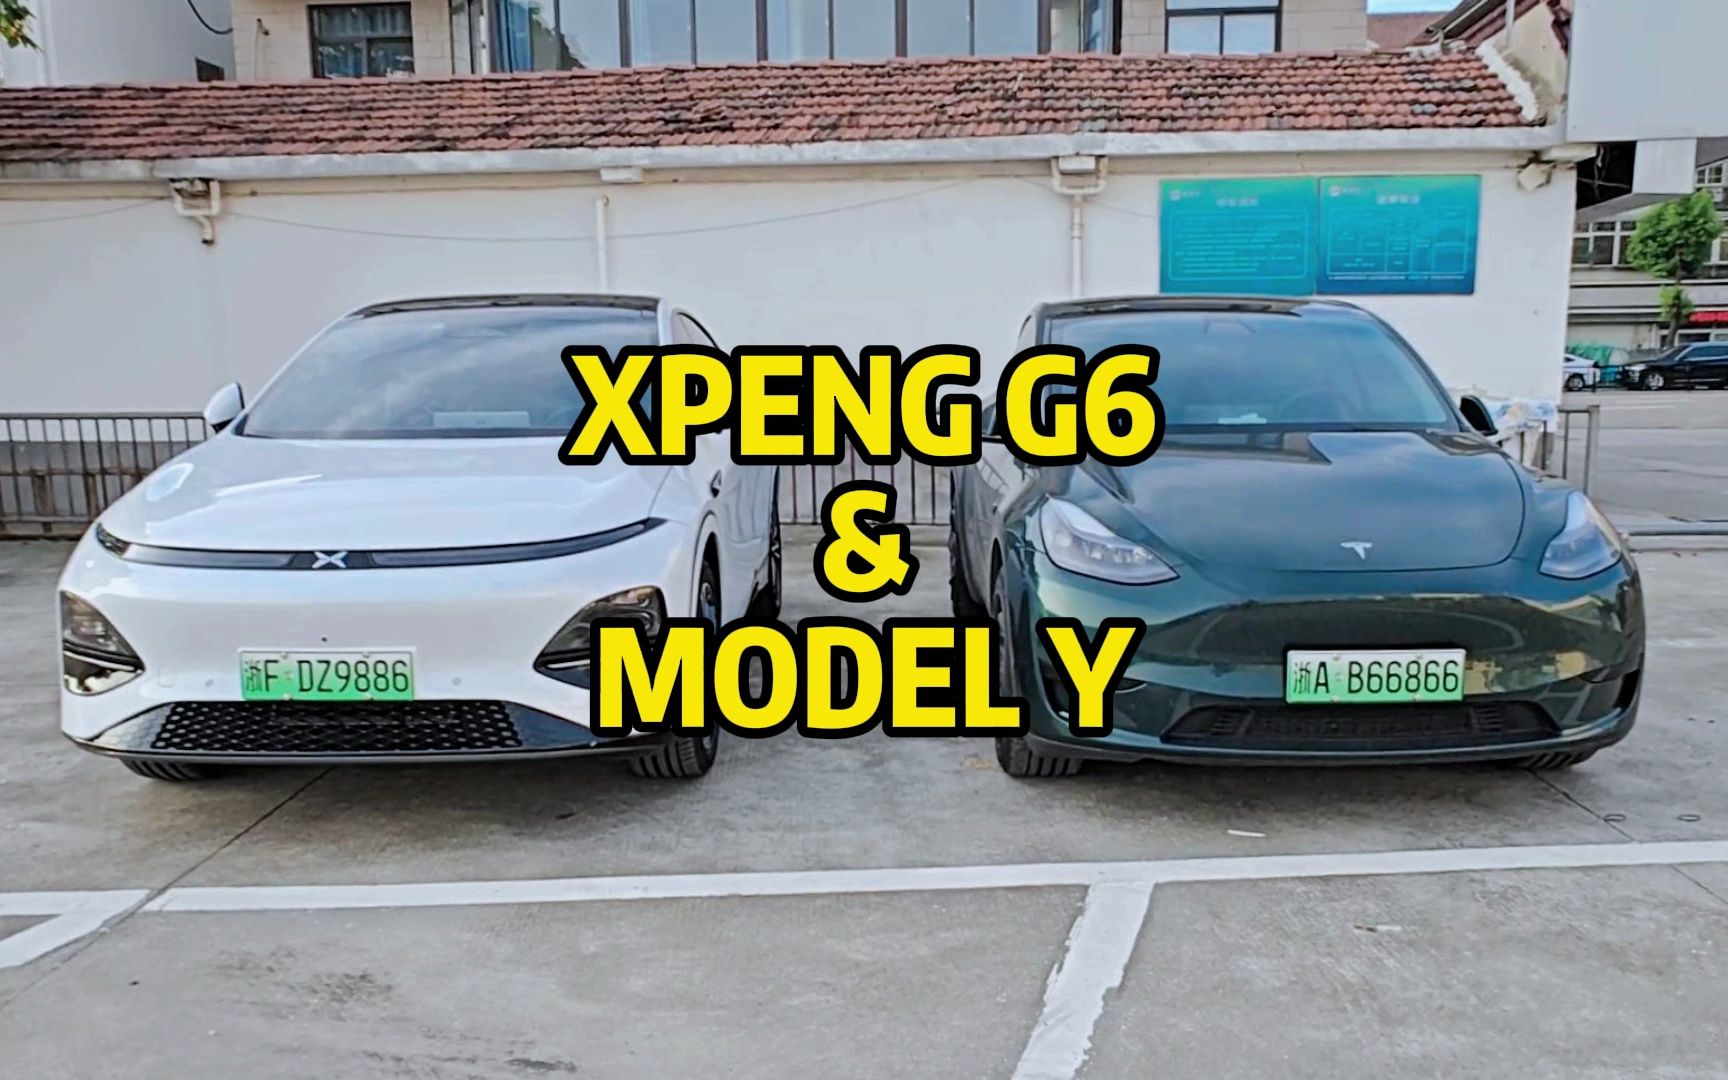 XPENG G6 AND MODEL Y